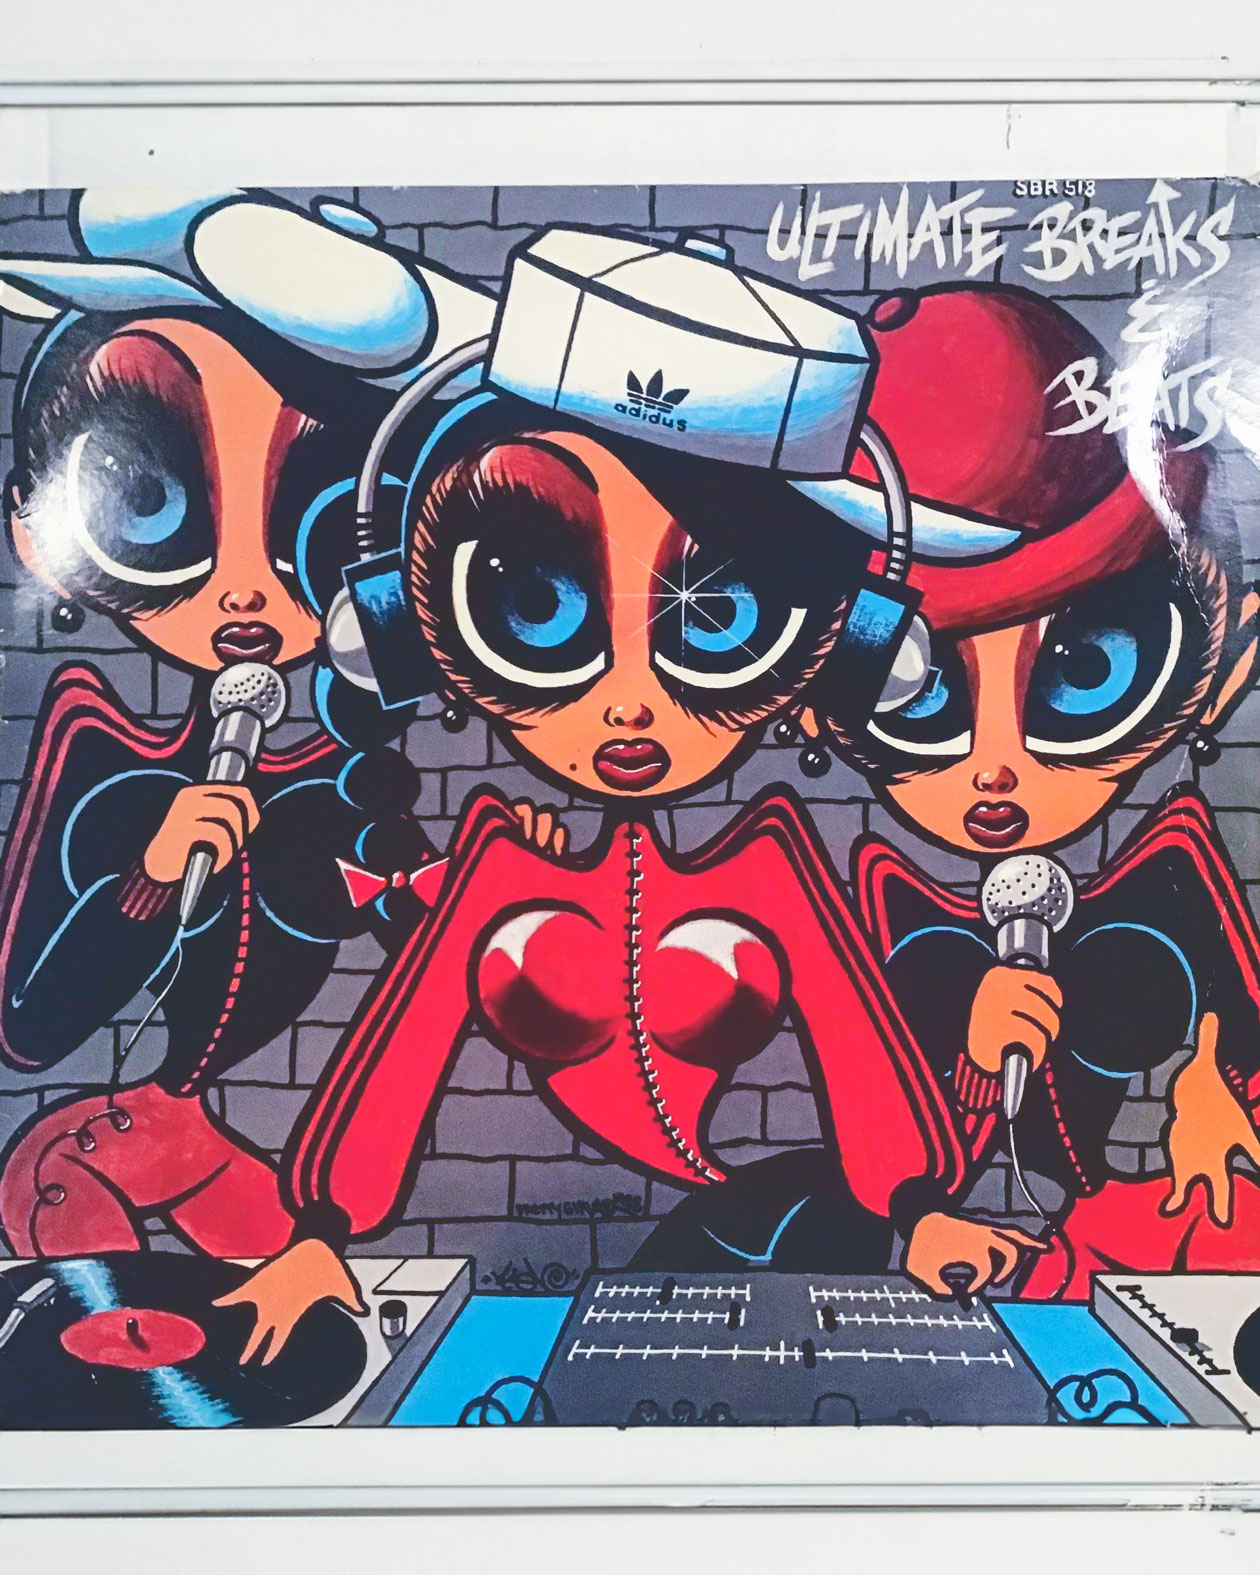 Volume 18 of a series of compilation albums called “Ultimate Breaks and Beats,” circa 1988